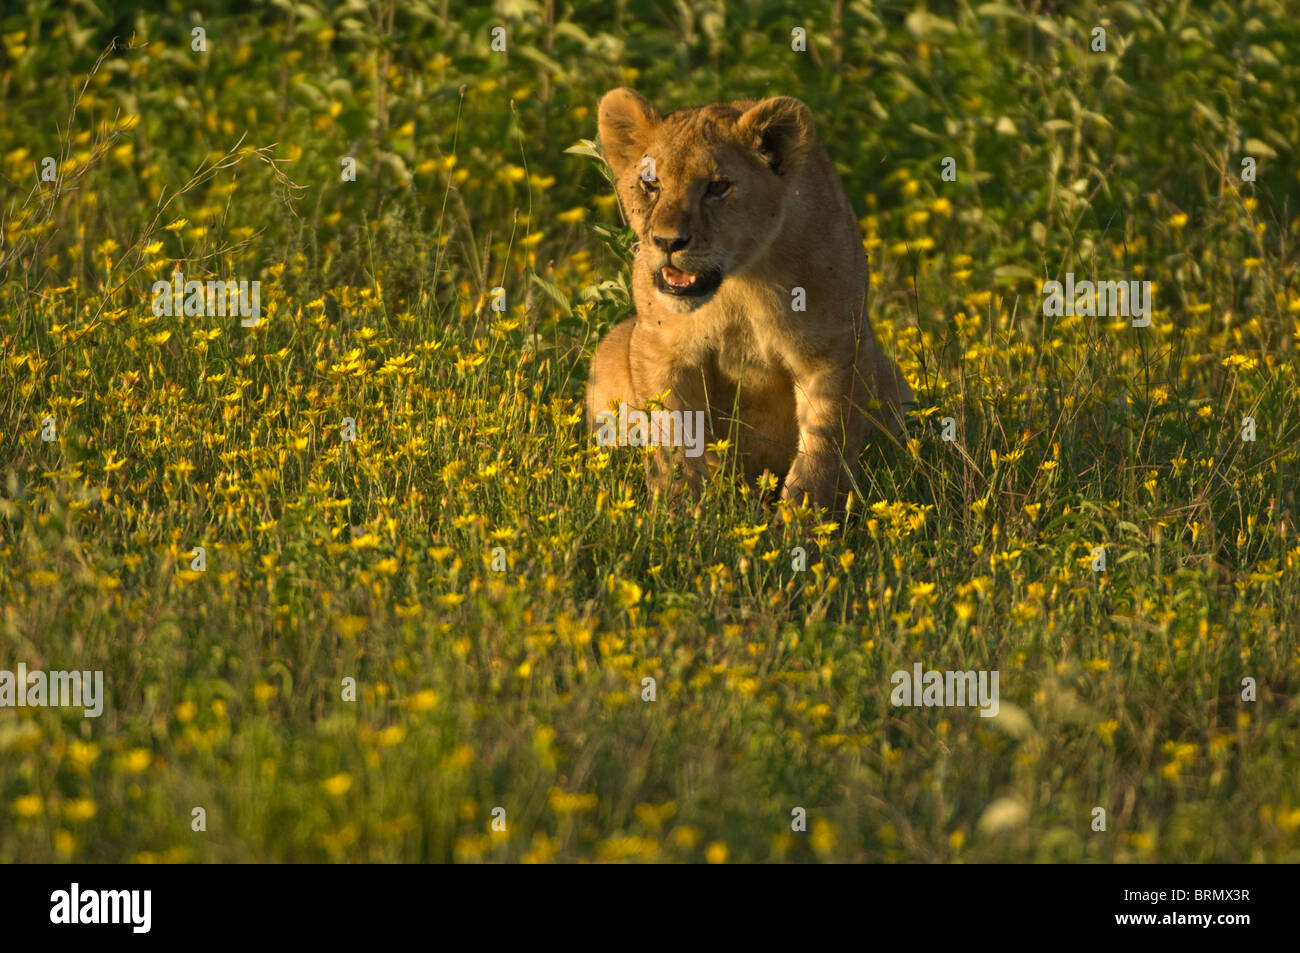 A lion cub sits in a field of yellow Bidens flowers Stock Photo